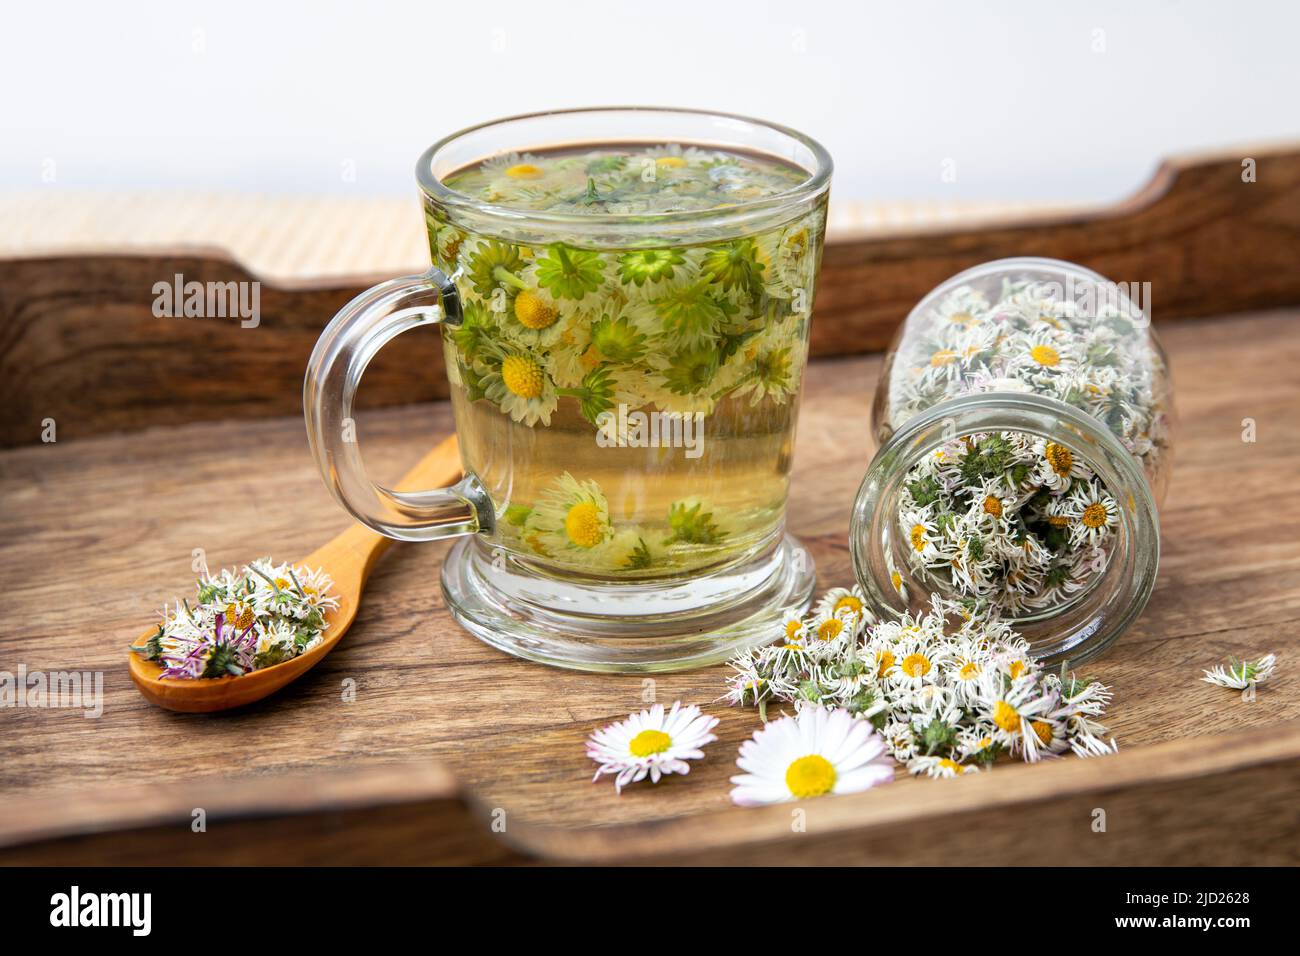 Dried herbal medicinal plant Common Daisy, also known as Bellis Perennis. Dry flower blossoms in glass jar and and herbal tea in glass, indoors still Stock Photo